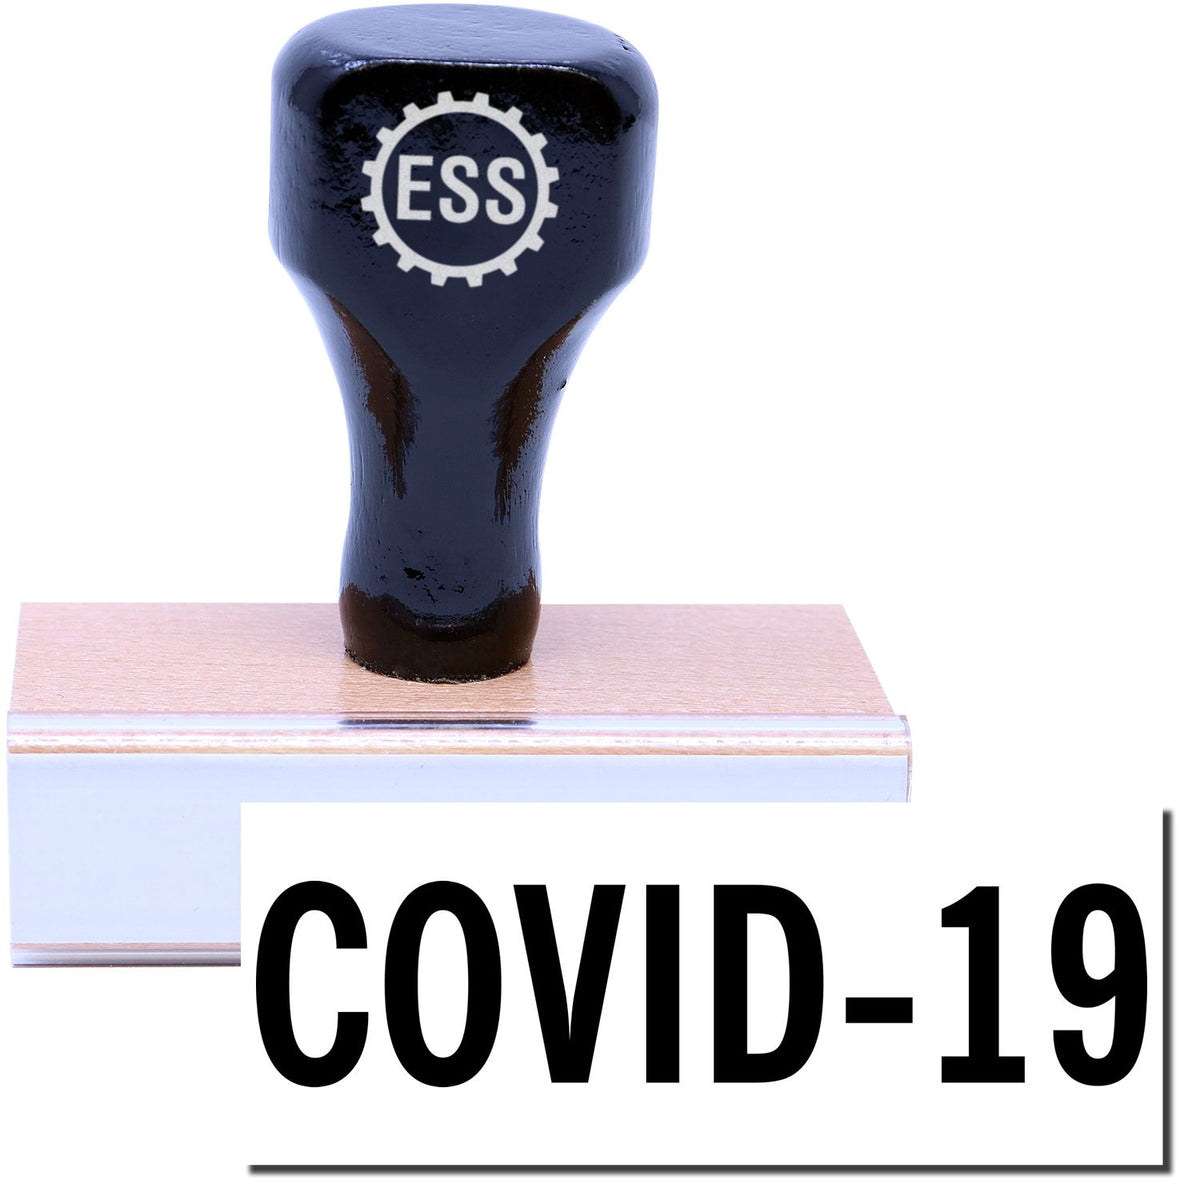 A stock office rubber stamp with a stamped image showing how the text &quot;COVID-19&quot; in bold font is displayed after stamping.